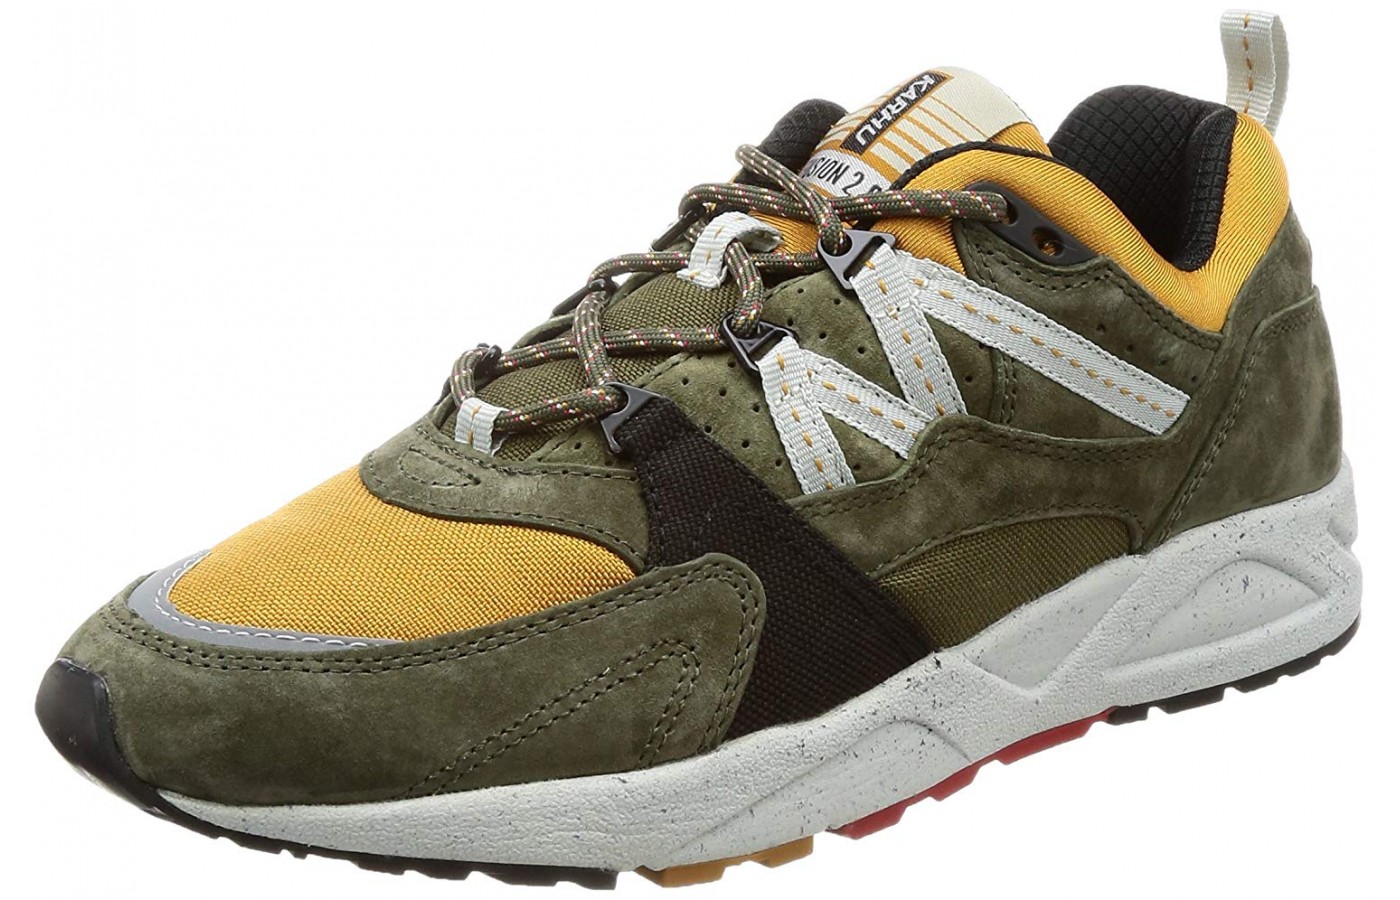 Karhu Fusion 2.0 Reviewed for 